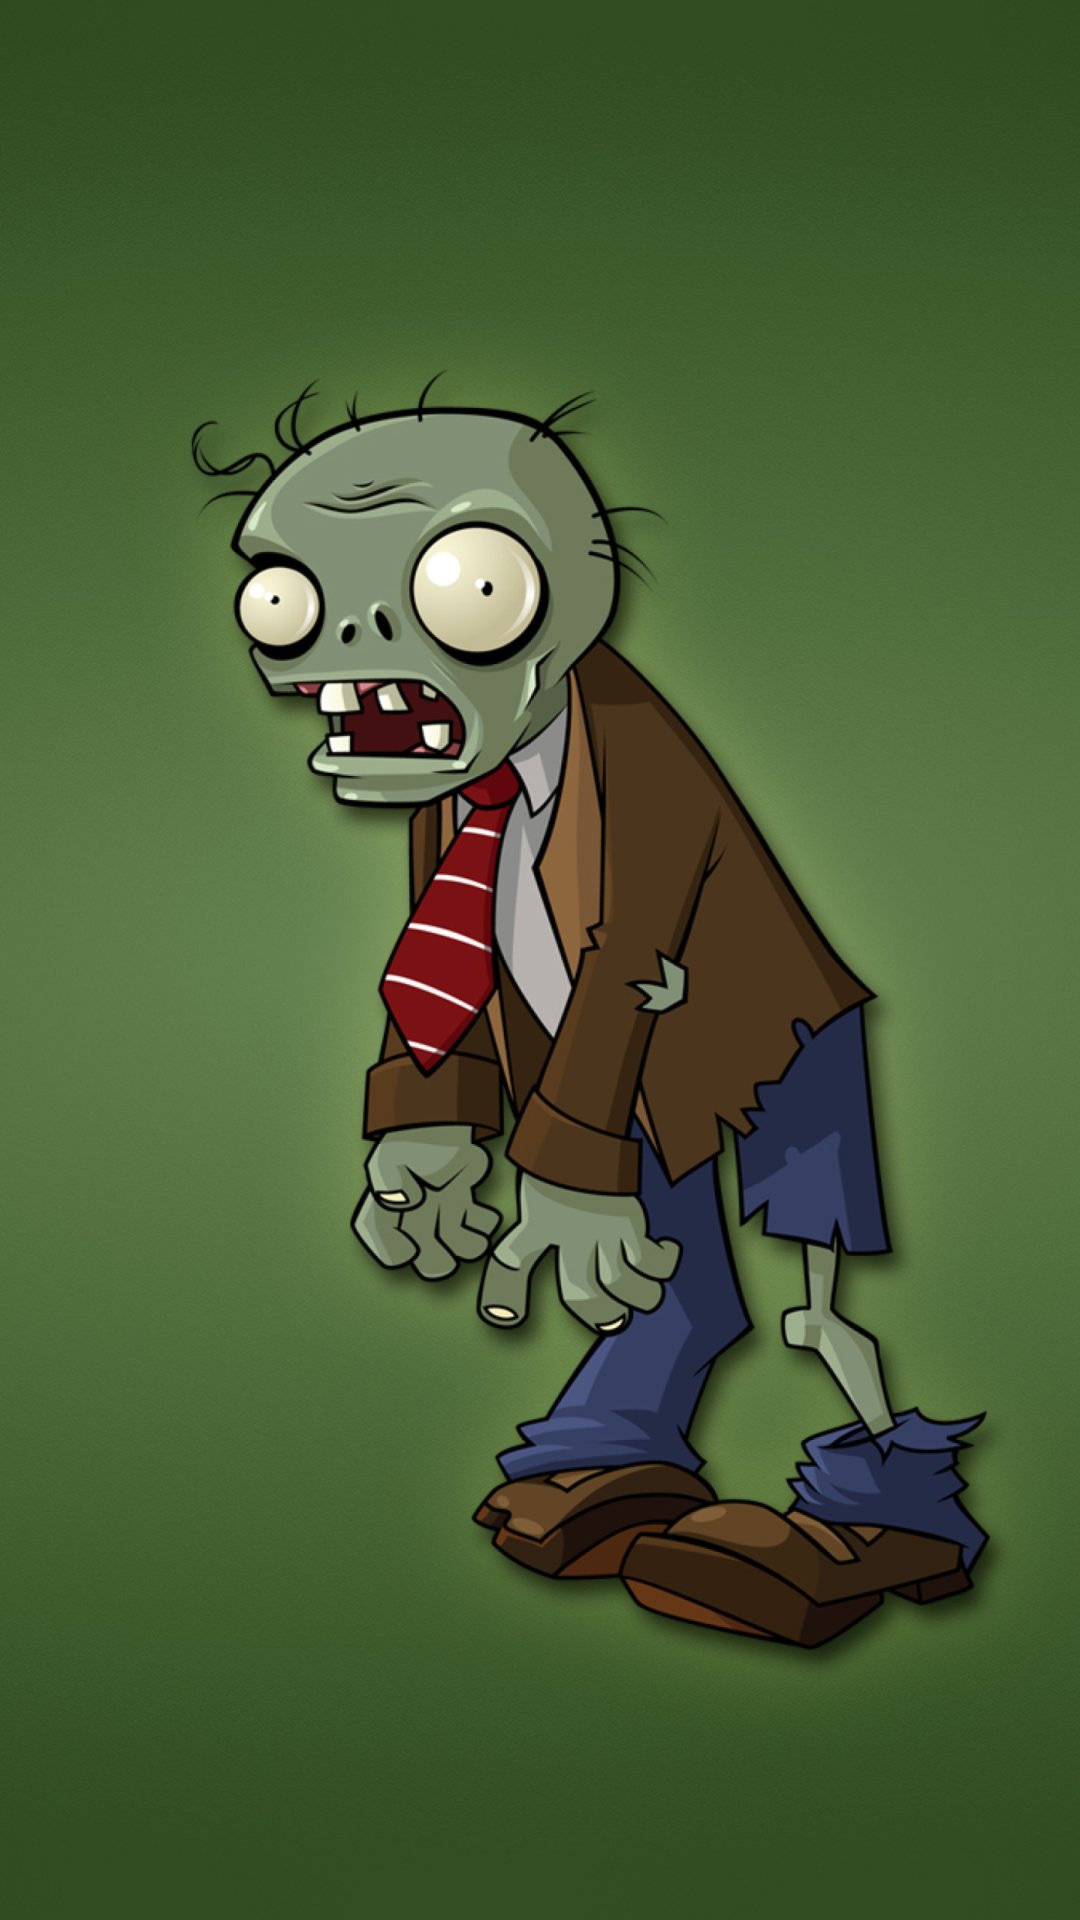 Discover 65+ plants vs zombies wallpaper - in.cdgdbentre